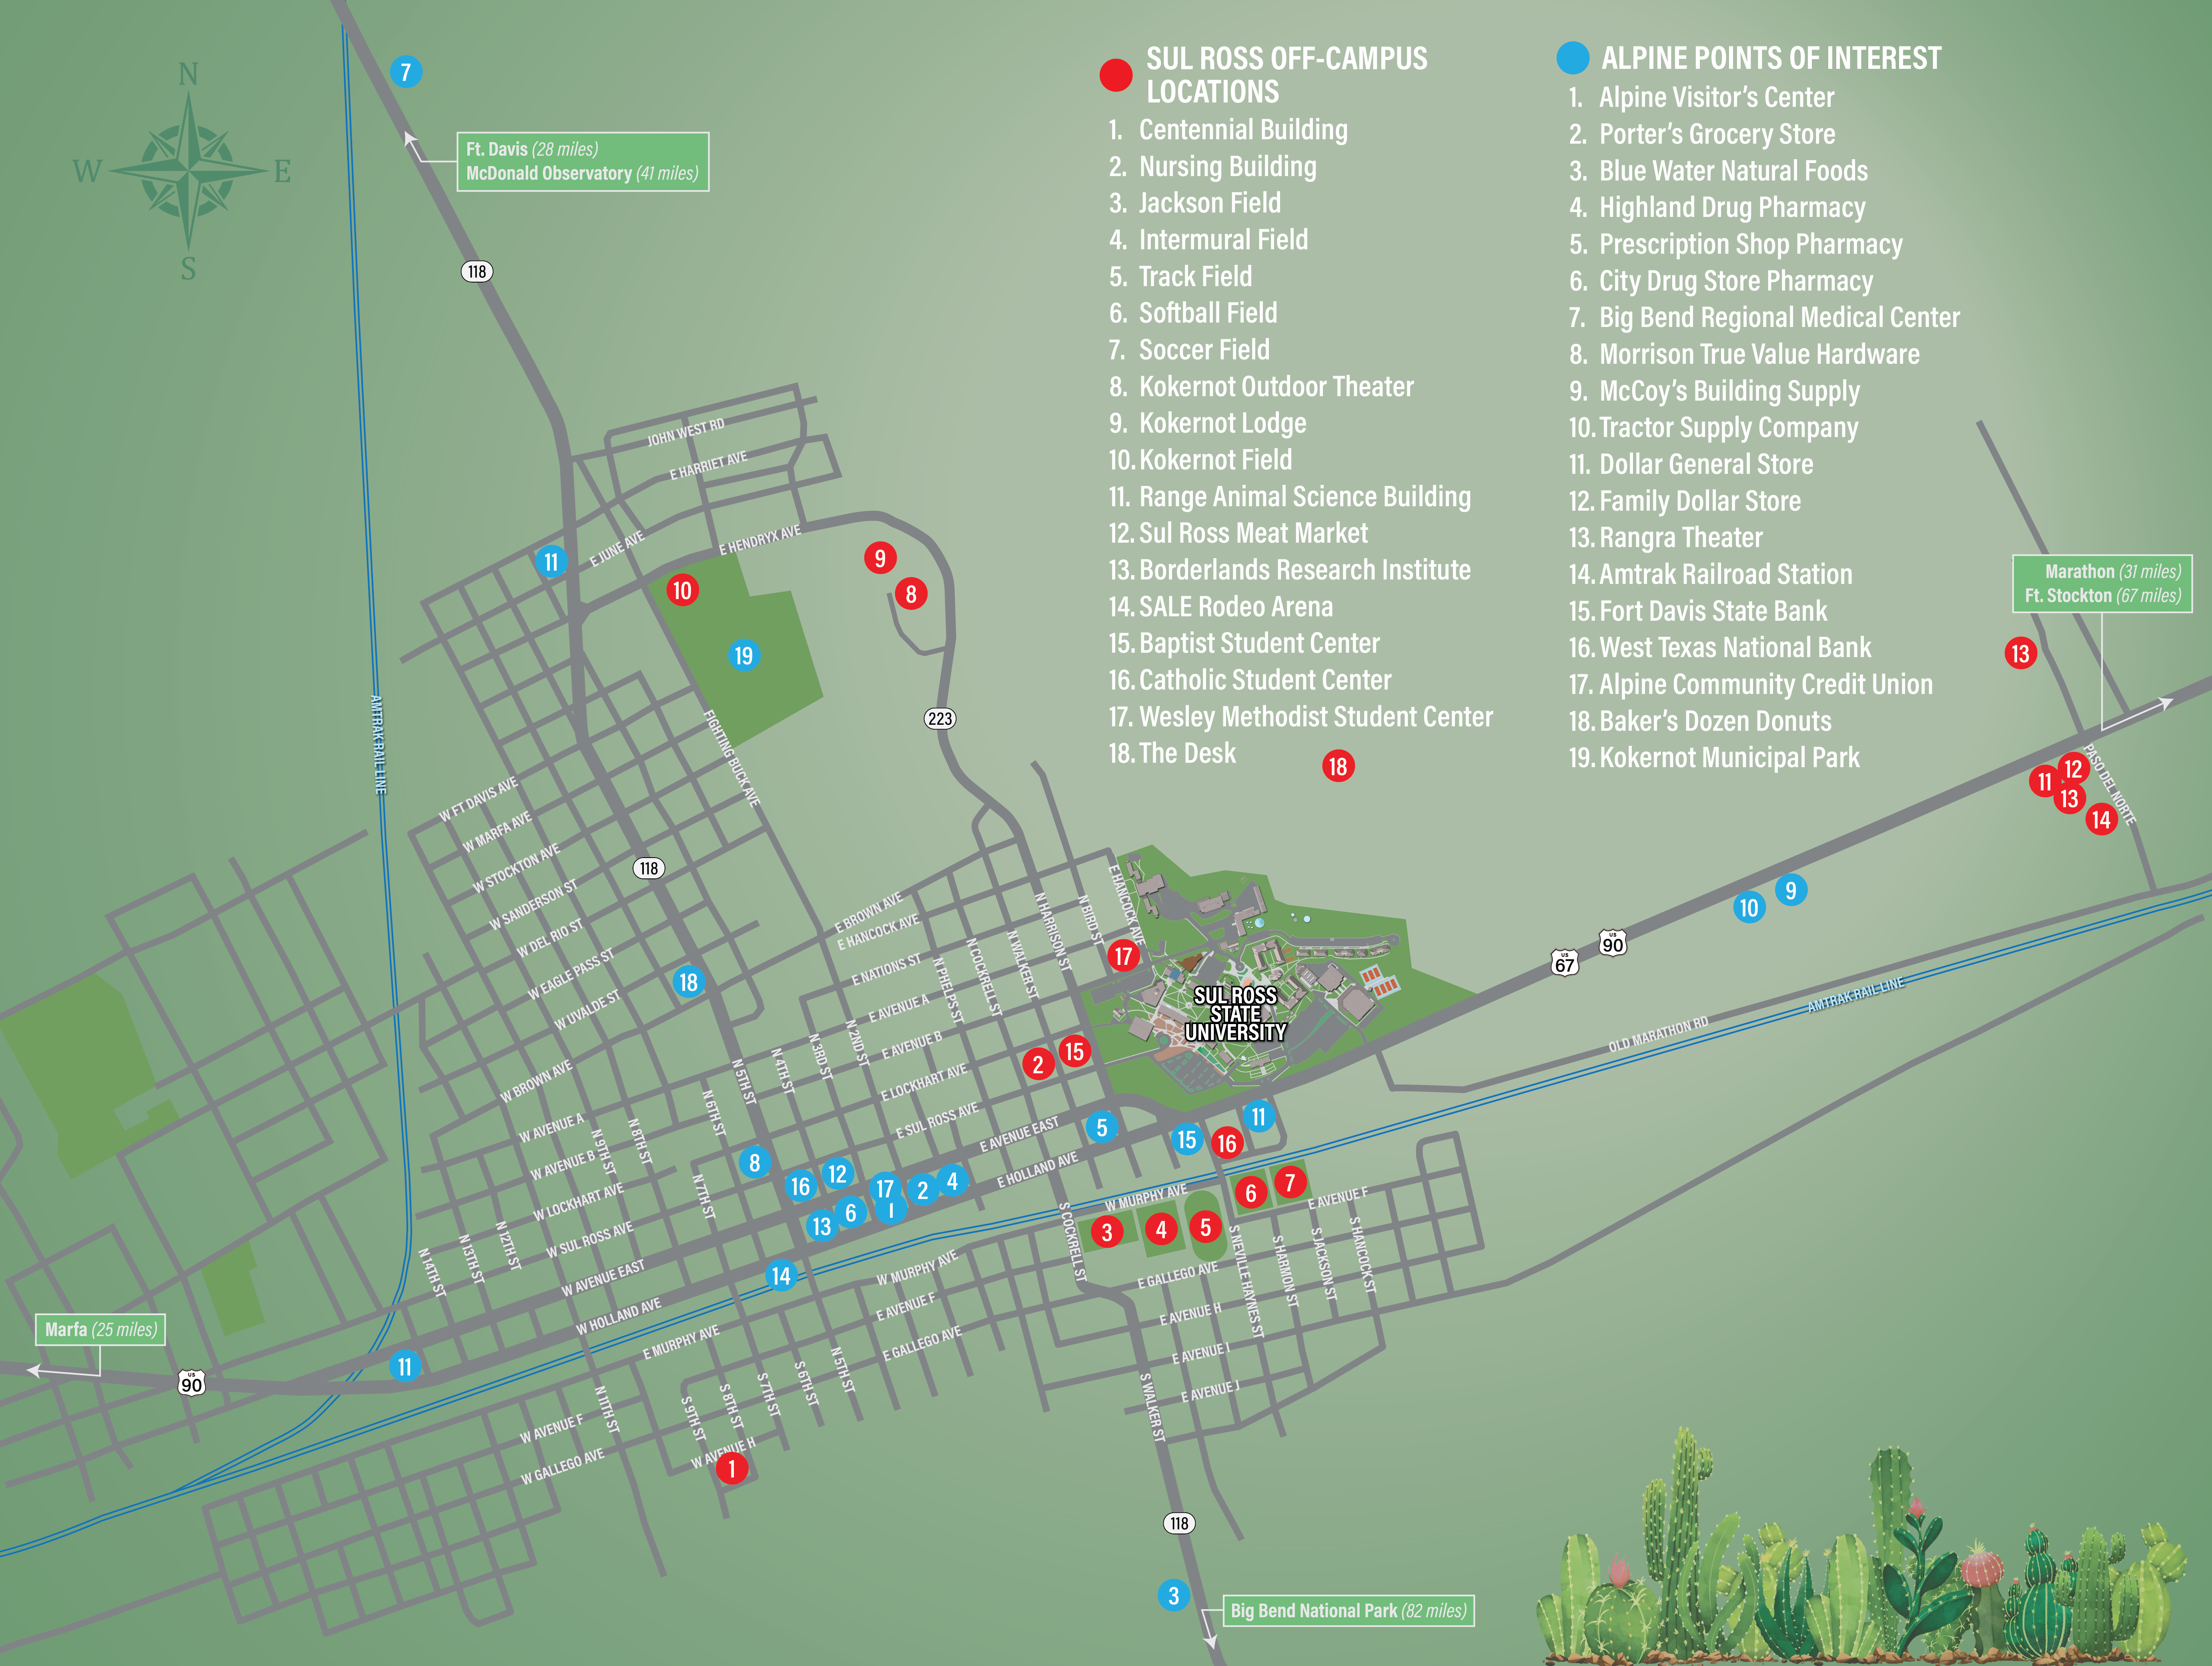 Area map of the city of Alpine, TX including Sul Ross off-campus locations like sports fields and the Range Animal Science facilities as well as various points of interest in town that may be helpful to students such as medical providers, banks, and grocery stores.